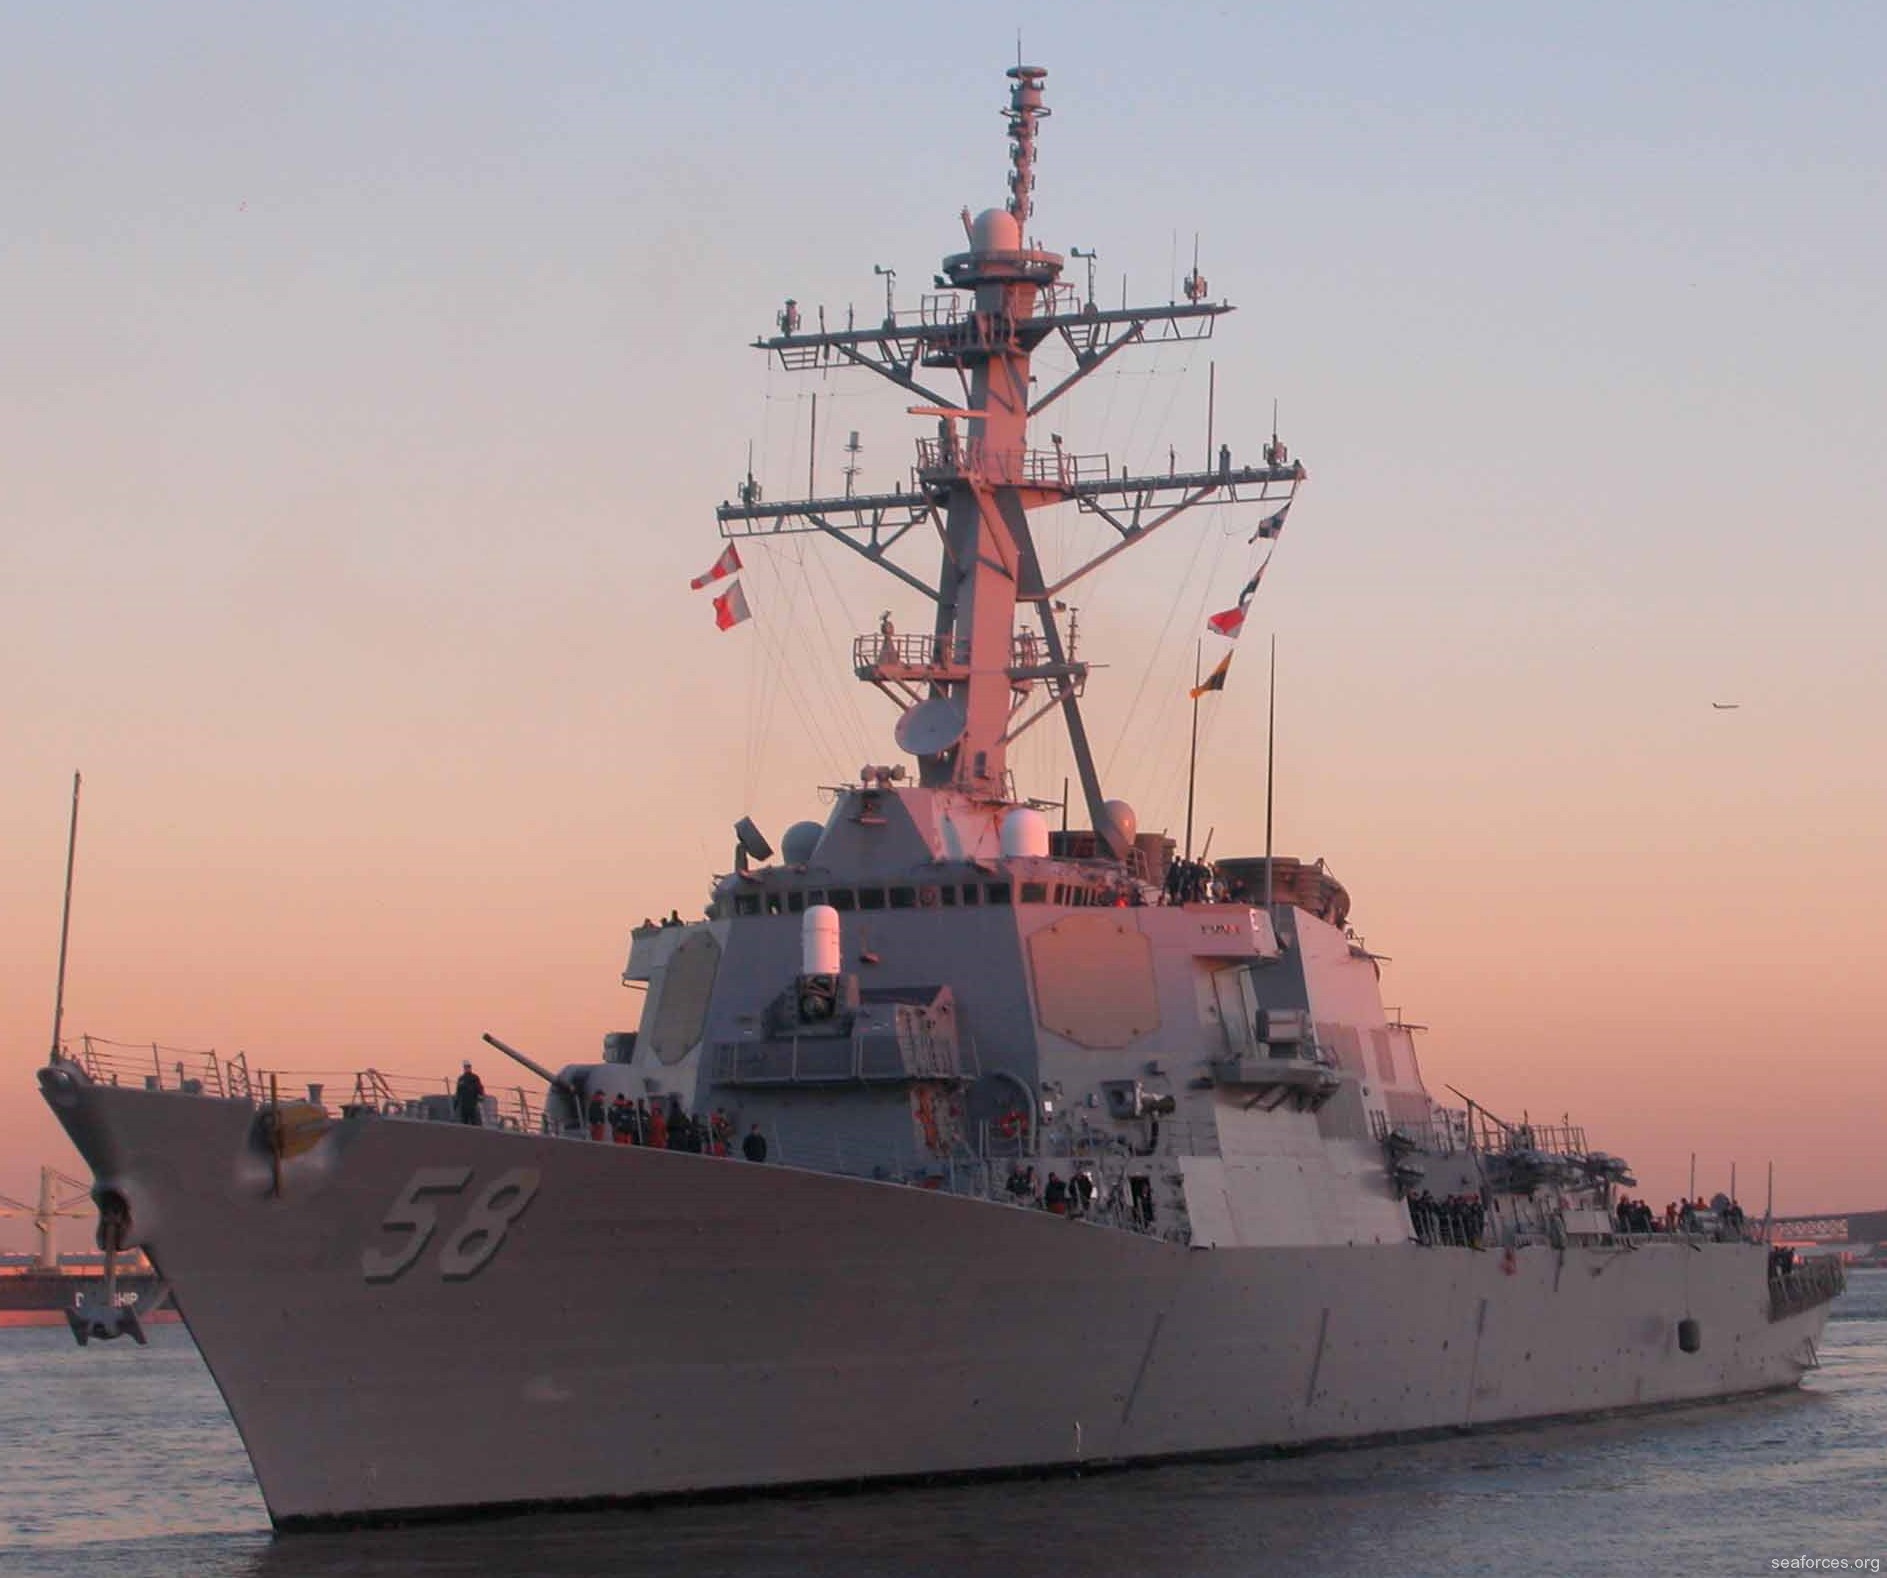 ddg-58 uss laboon guided missile destroyer us navy 71